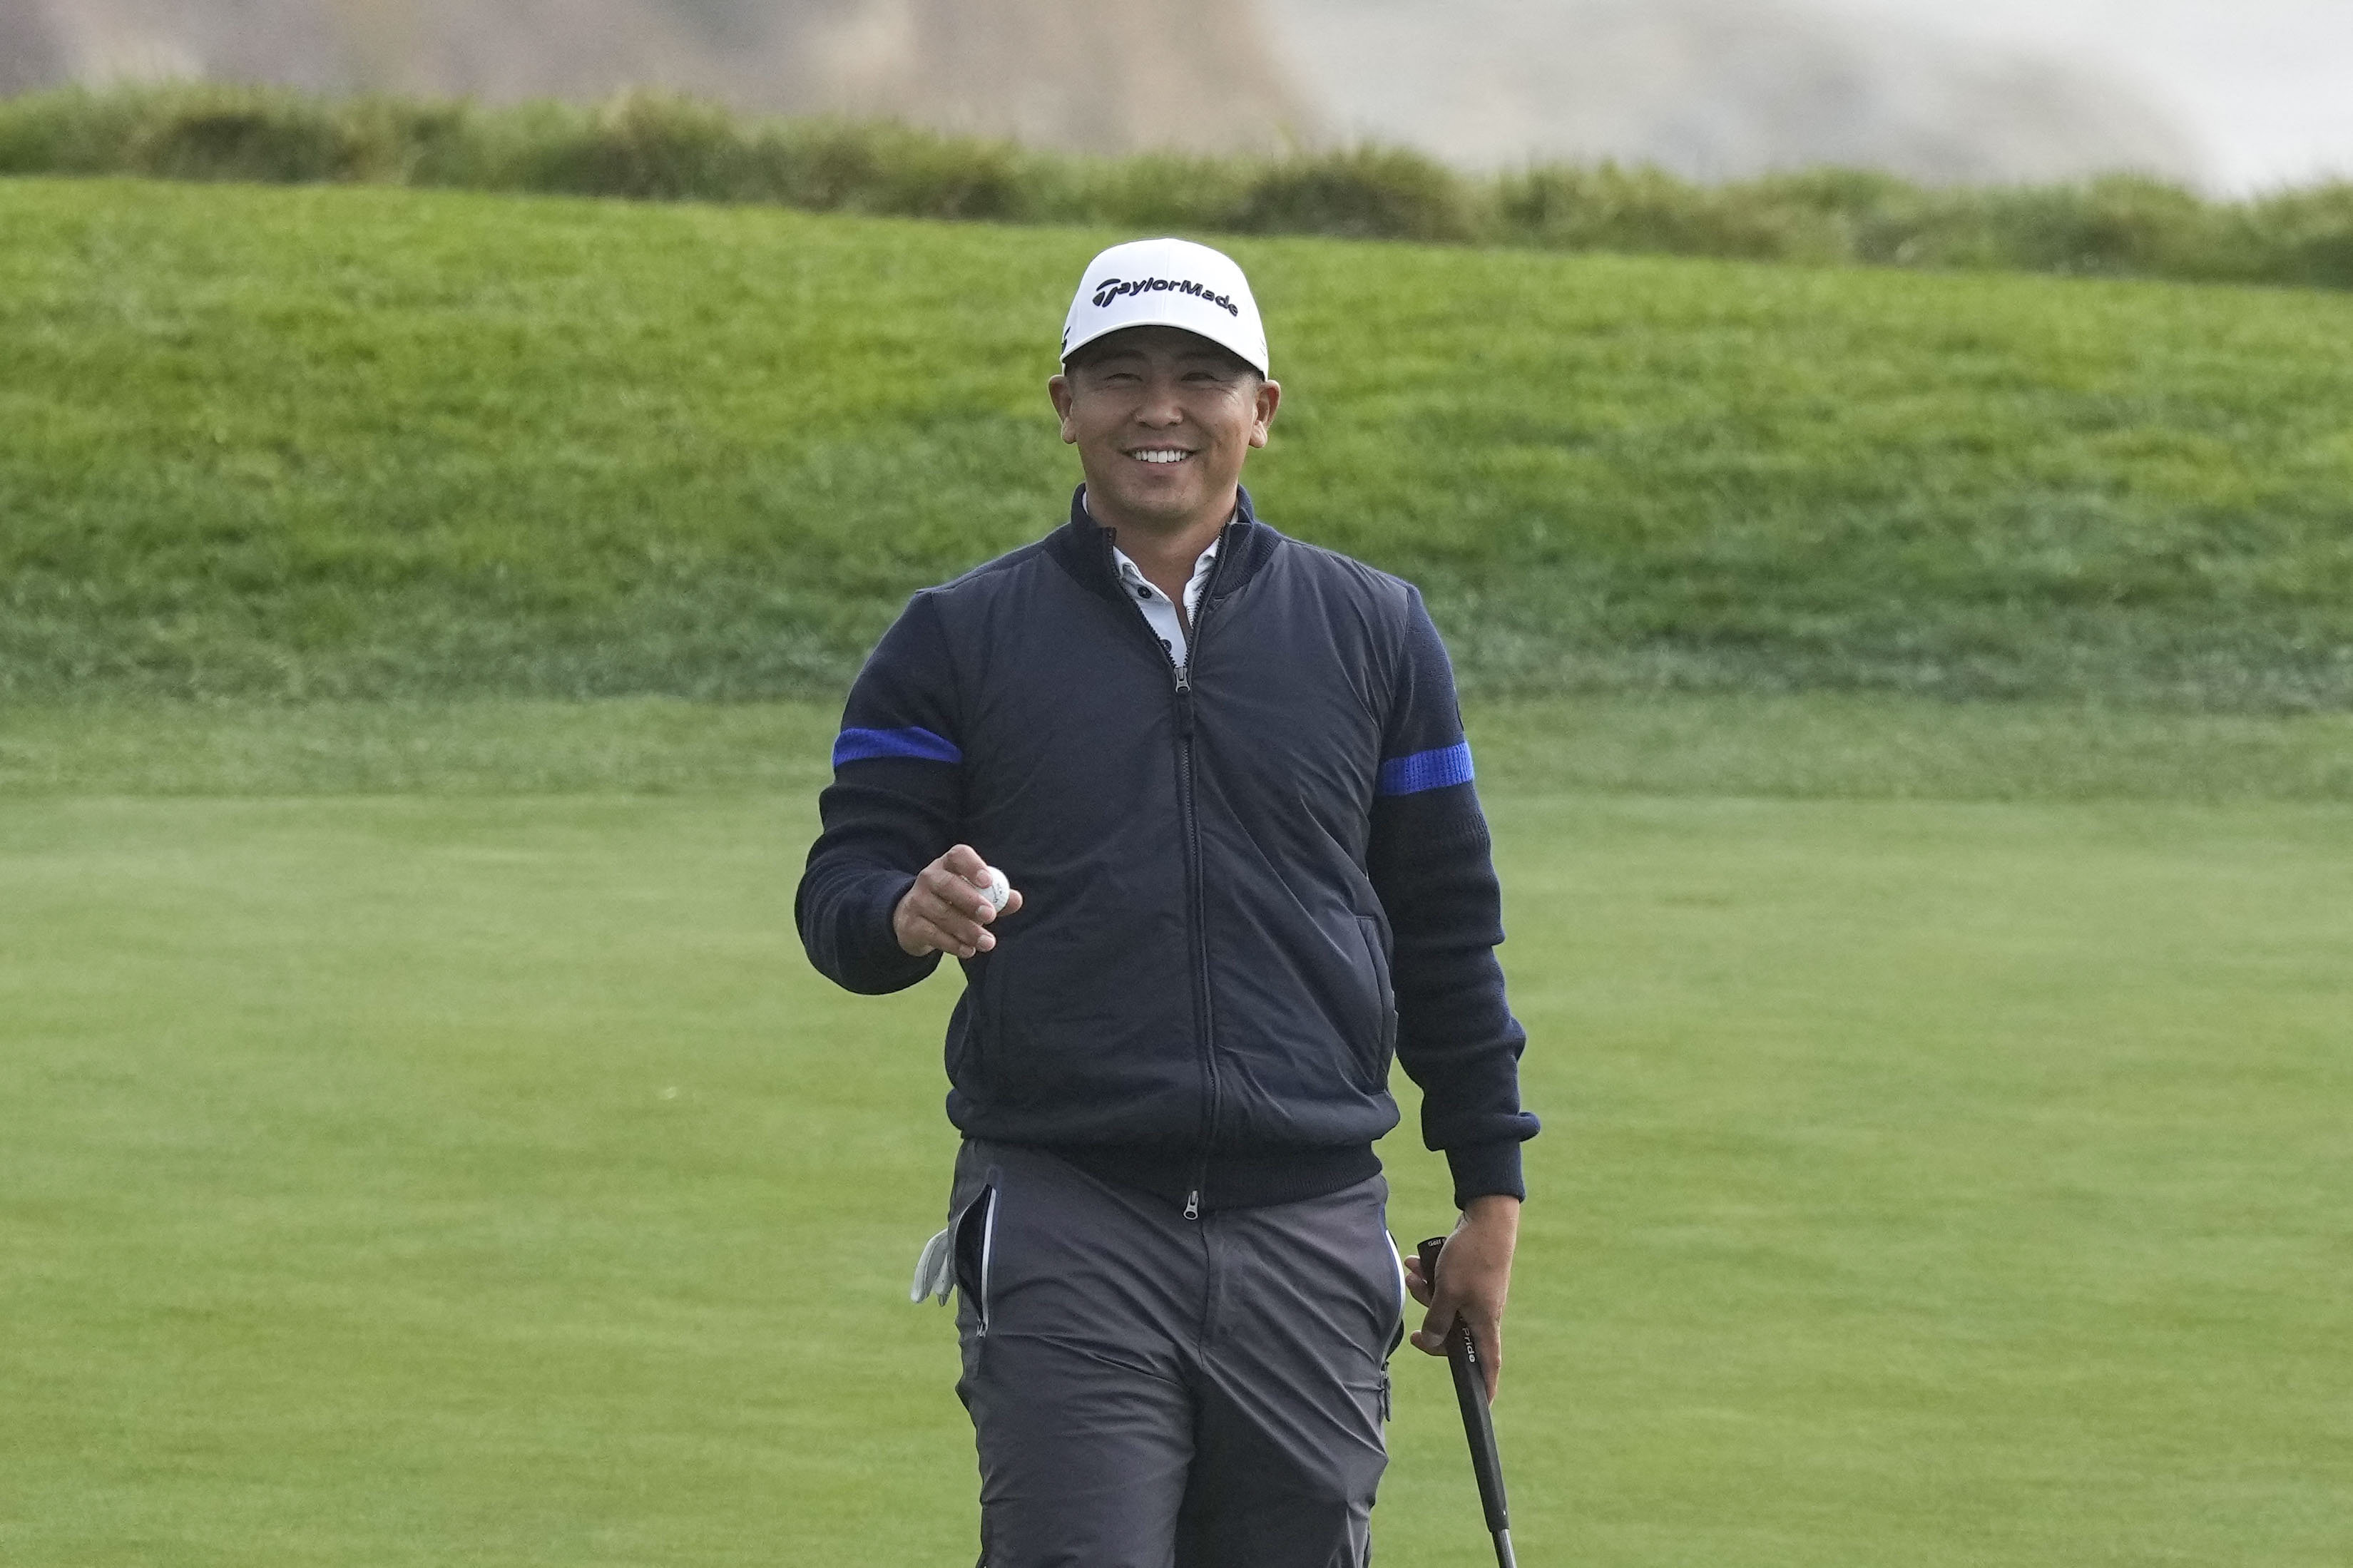 Kurt Kitayama acknowledges the crowds after making his putt on the ninth hole during the second round of the AT&T Pebble Beach Pro-Am. Photo: USA TODAY Sports